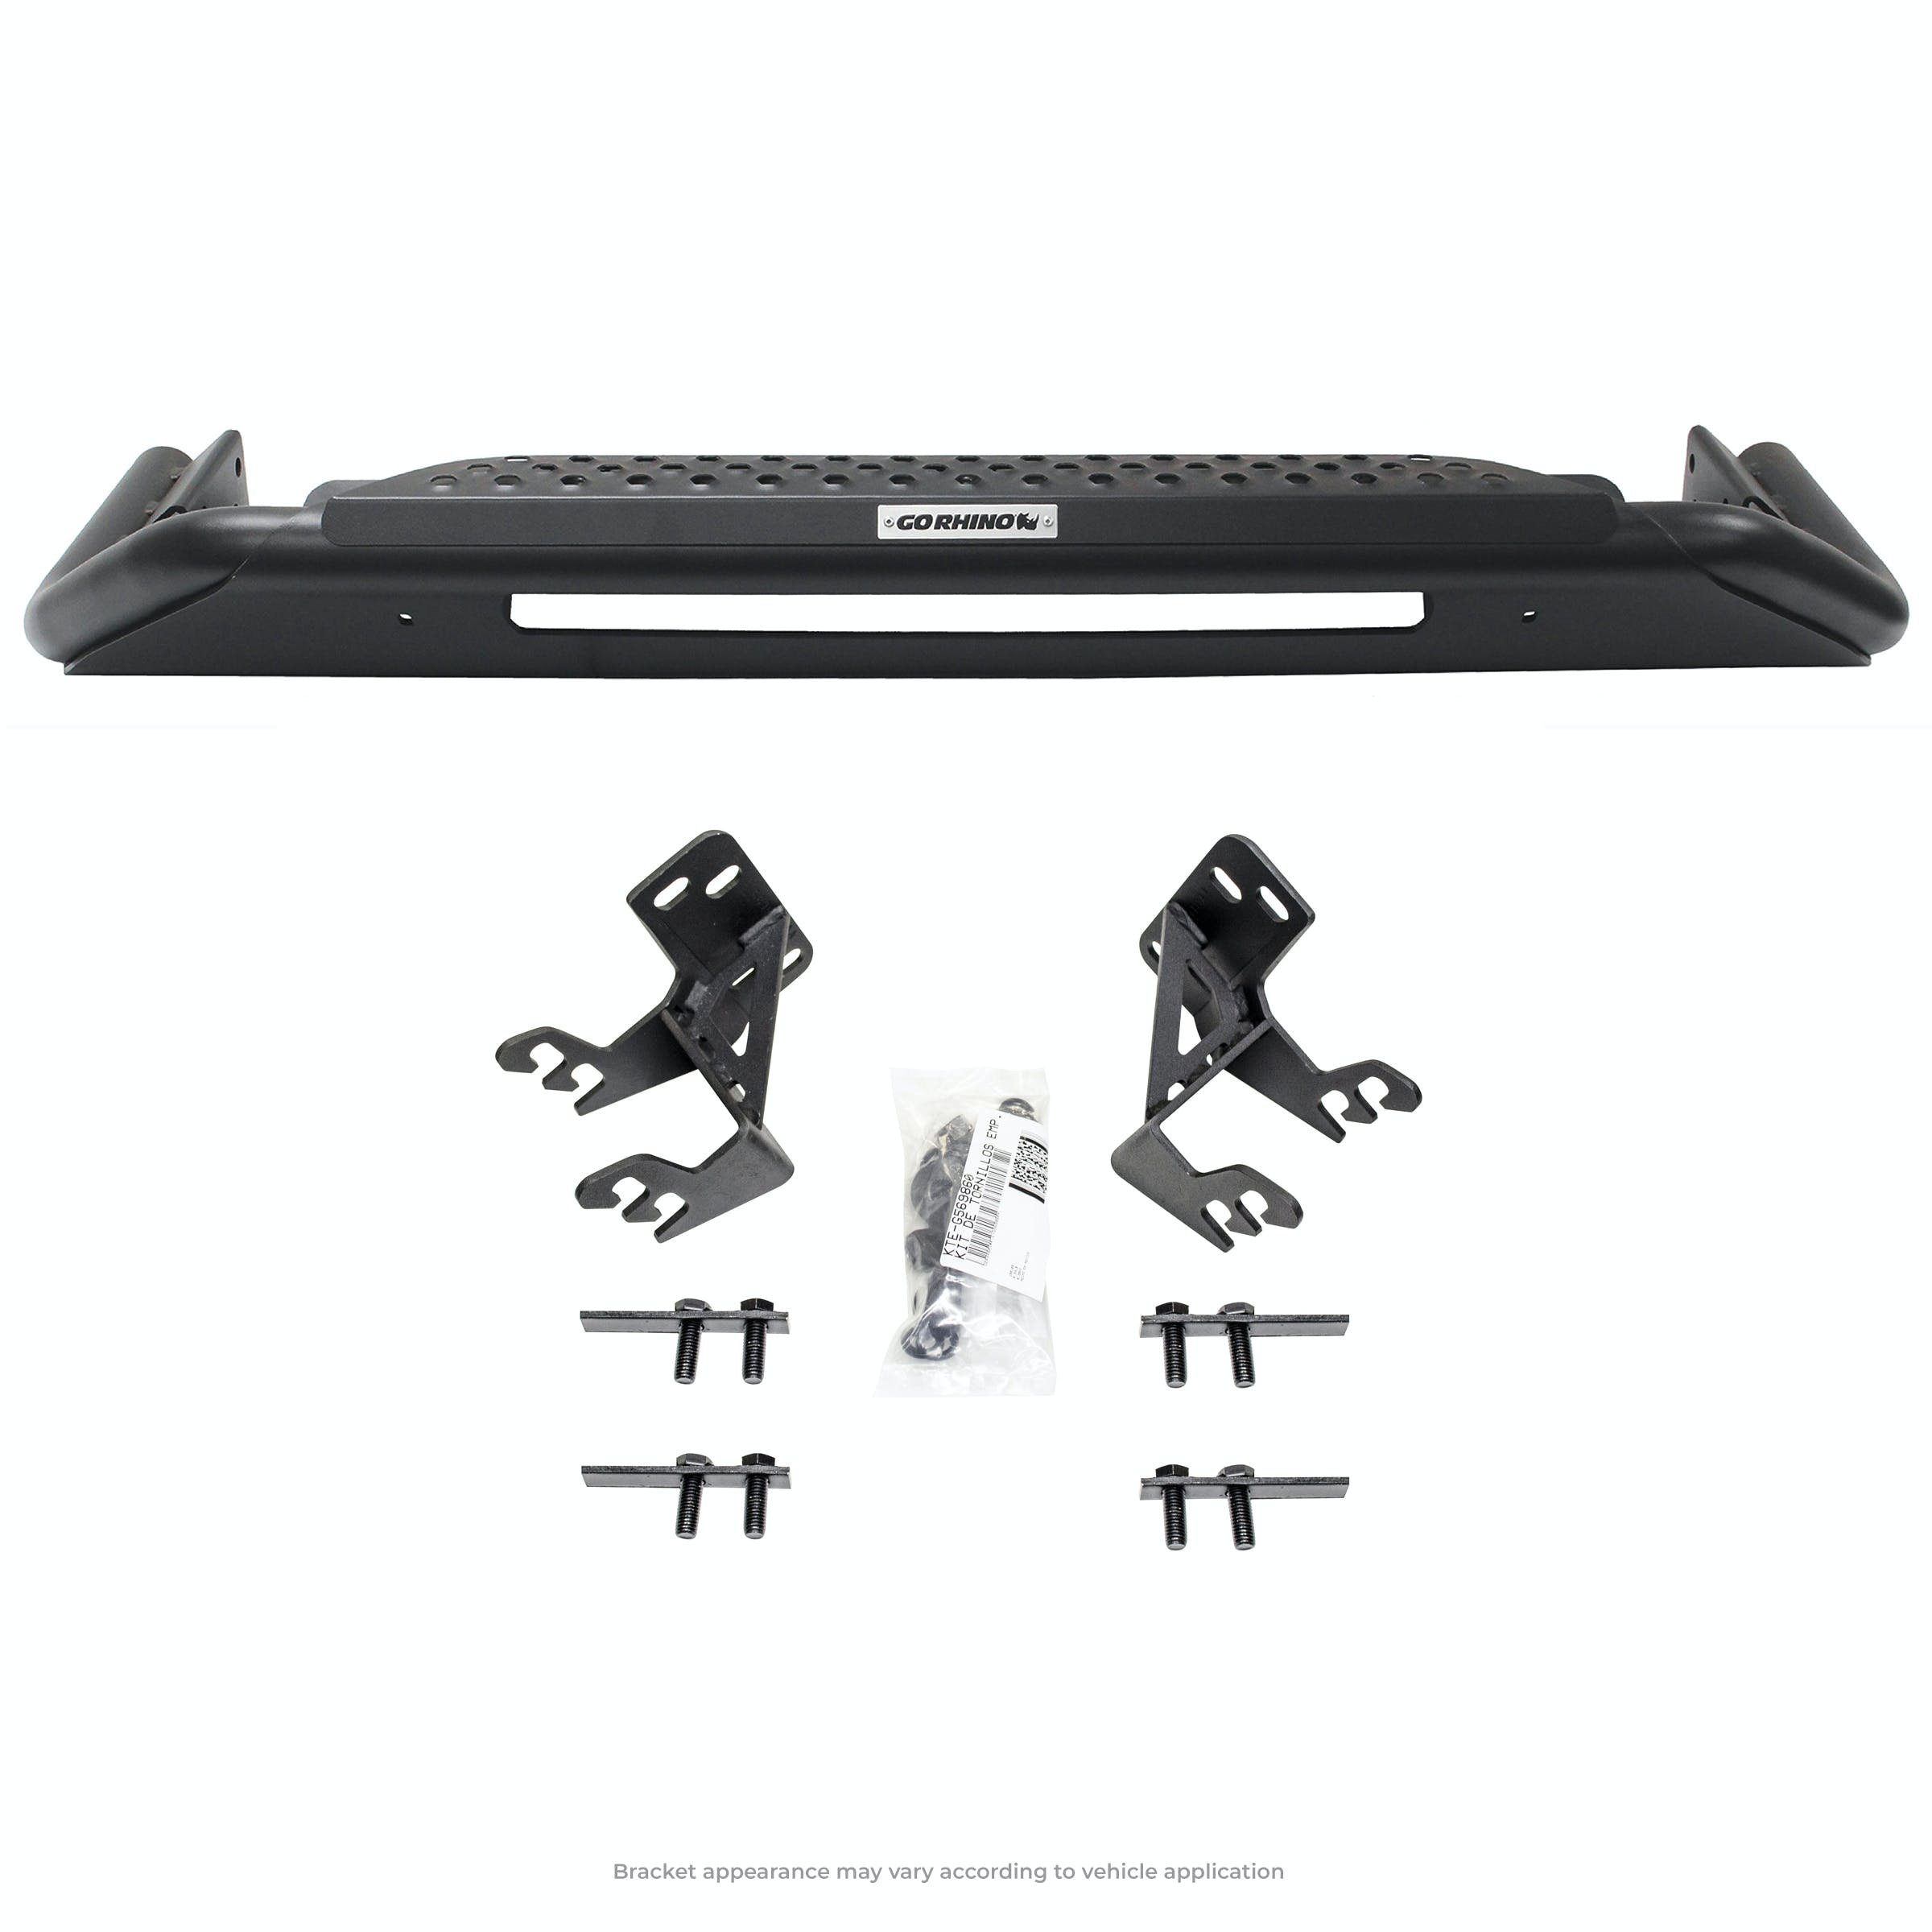 Go Rhino 562970T RC3 LR - Complete kit: Front guard + Brackets